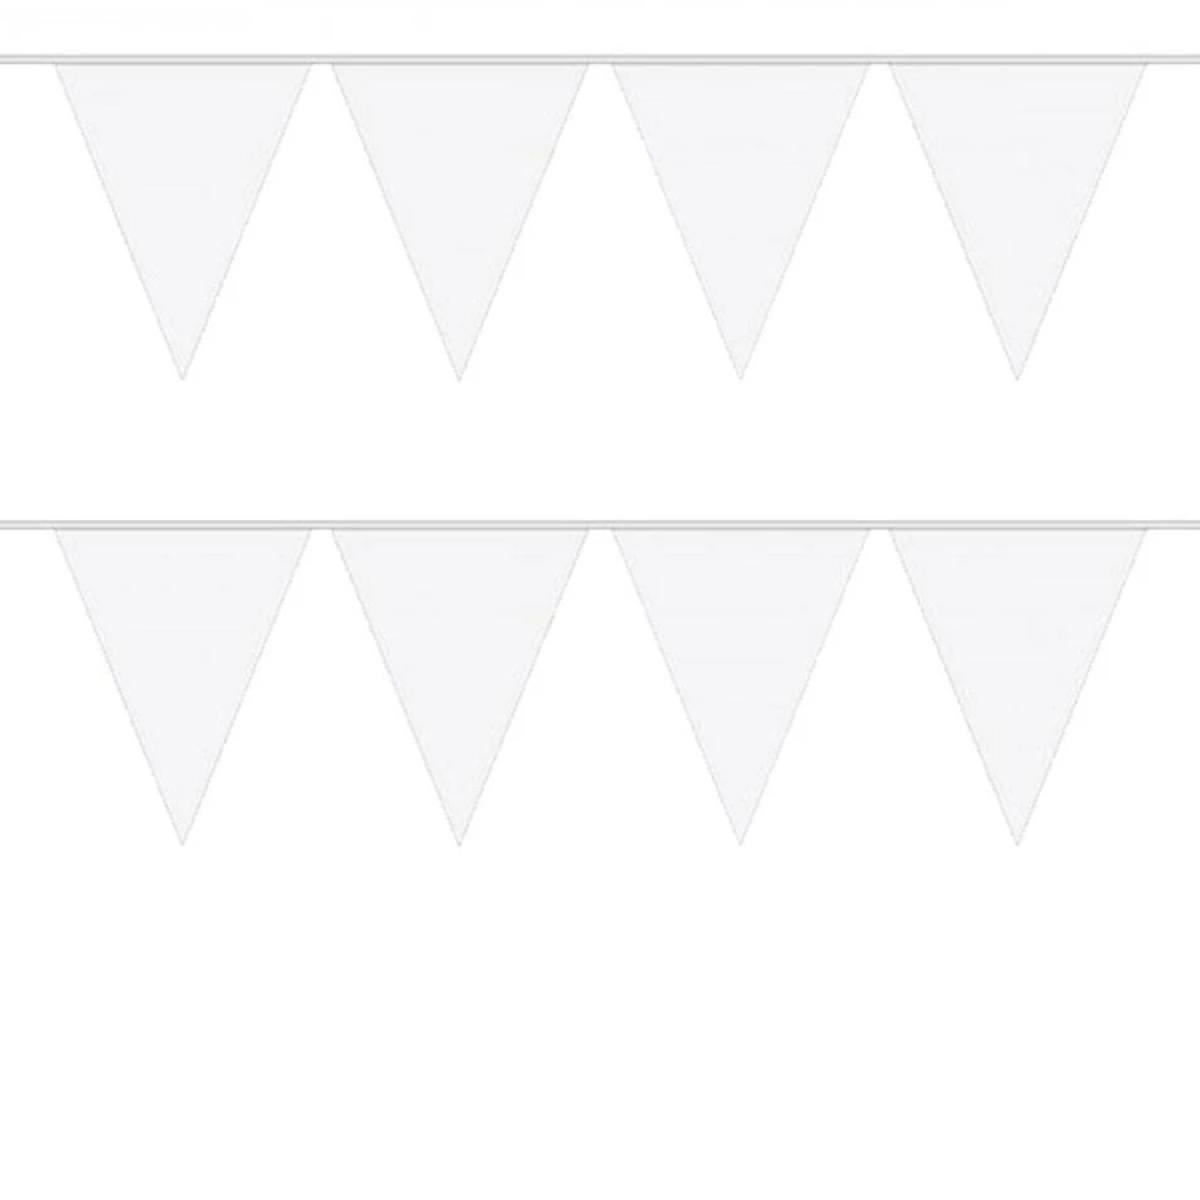 White Pennant Flag Bunting 10m with 15 pennants each 30cm x 18cm. By Amscan 9903782 it's available in the UK here at Karnival Costumes online party shop